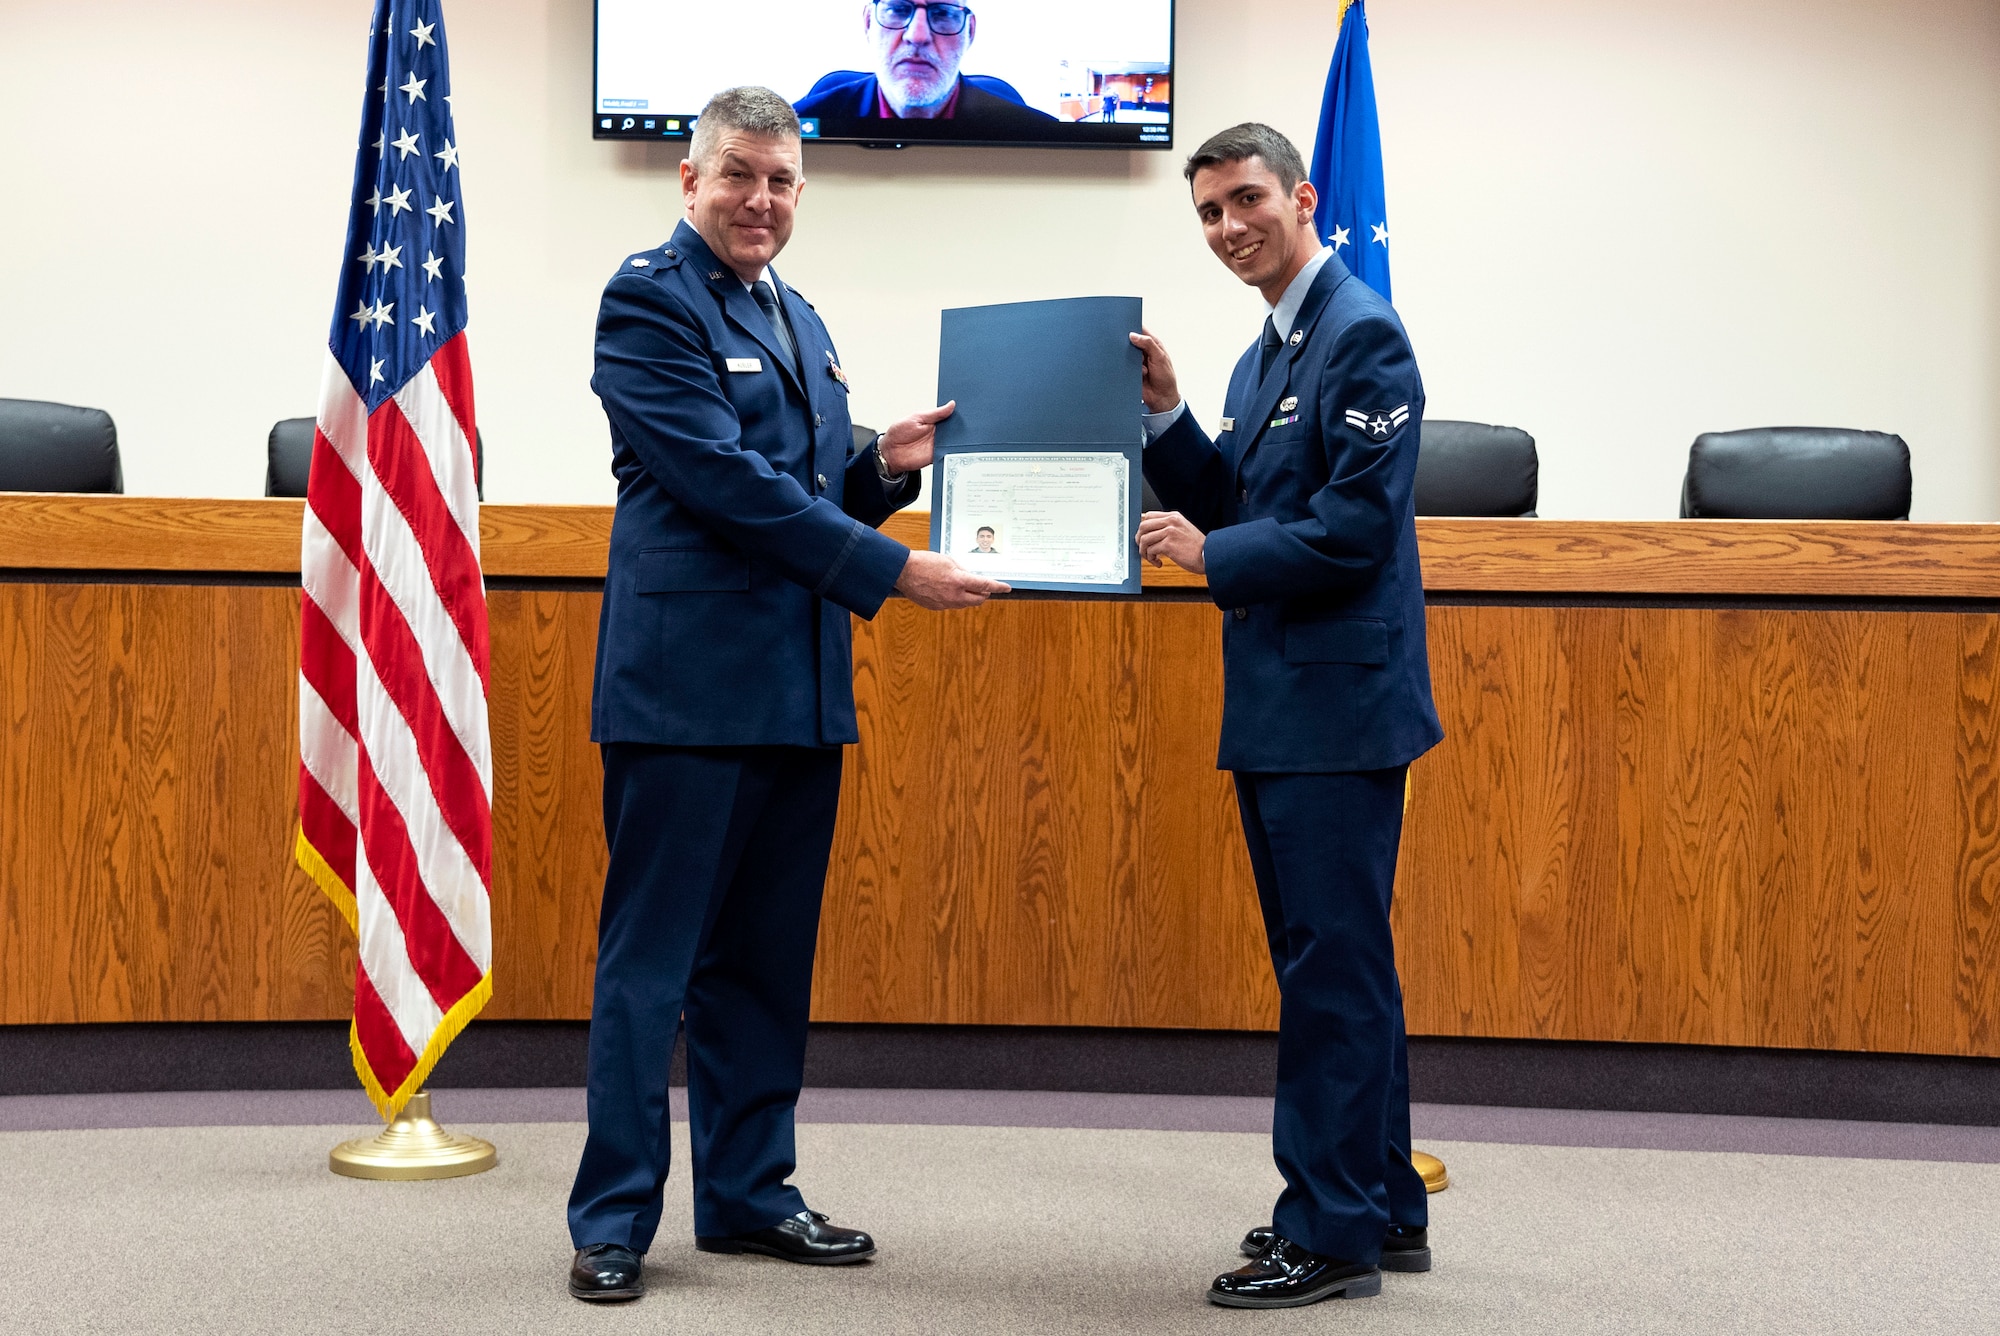 Lt. Col. Joseph J. Kubler at left, holding a citizenship certificate with Airman 1st Class Lowell Minick at right.